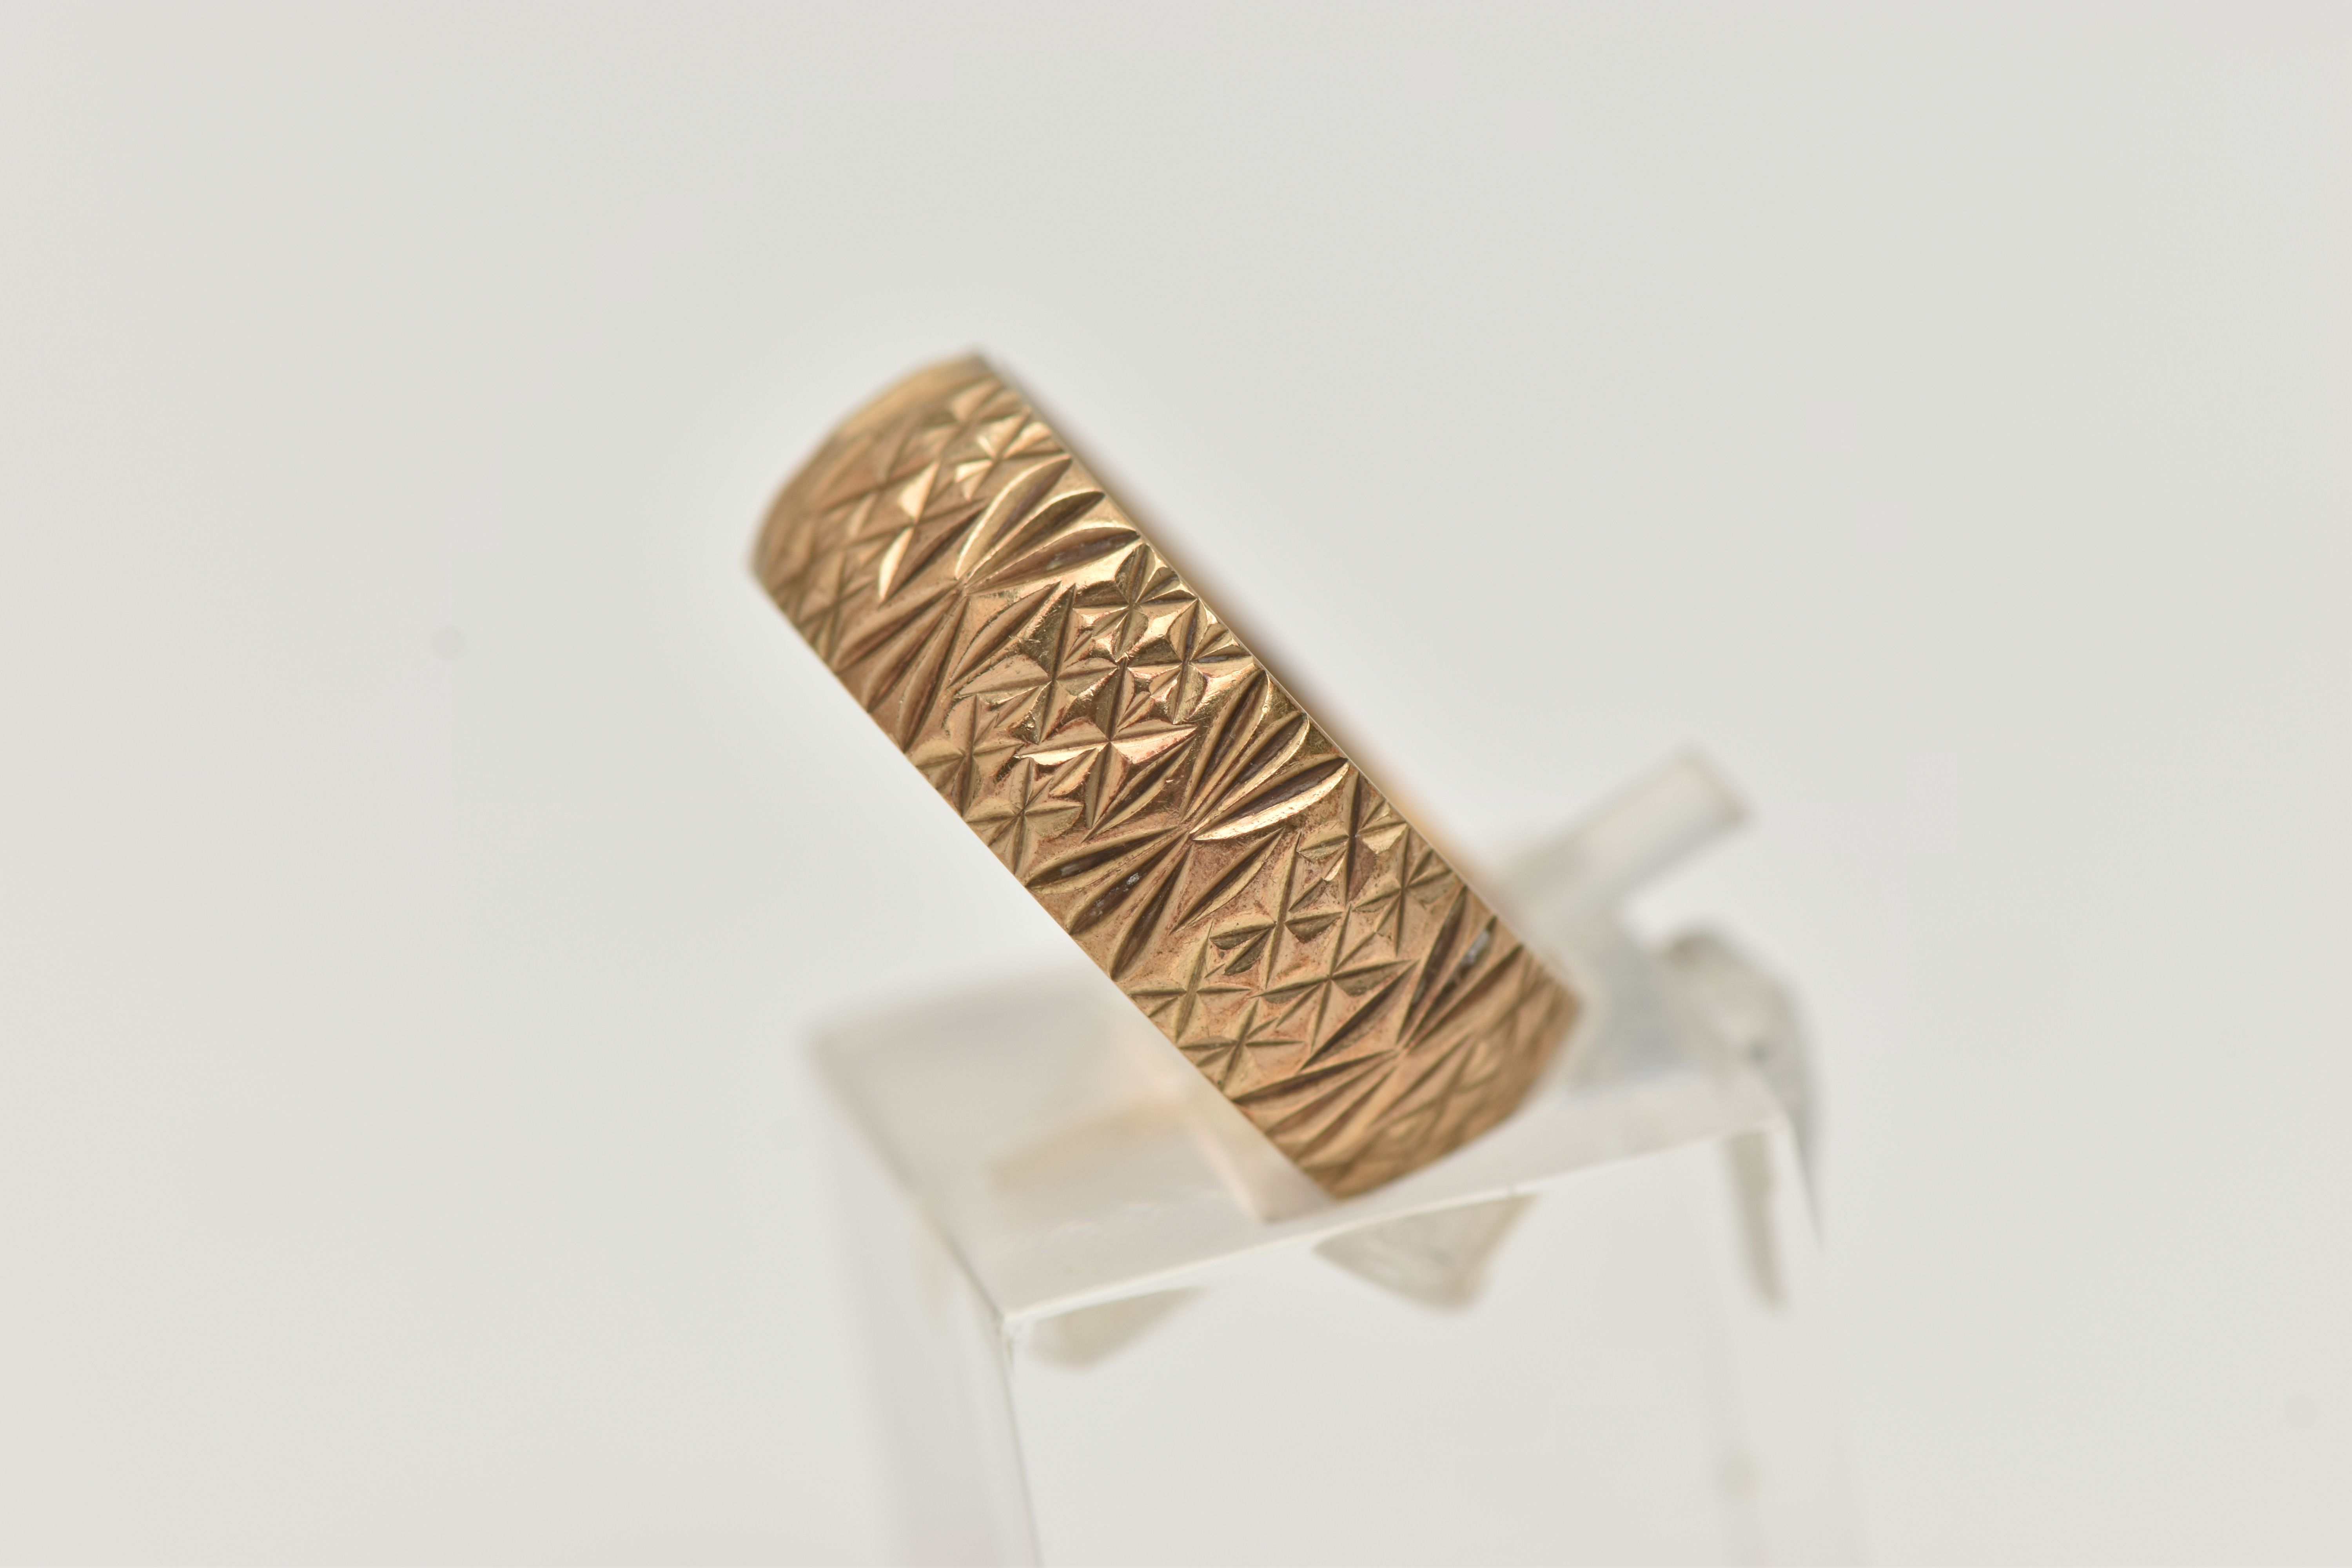 A 9CT YELLOW GOLD RING, designed as a textured band, measuring approximately 7.0mm wide, - Image 2 of 4